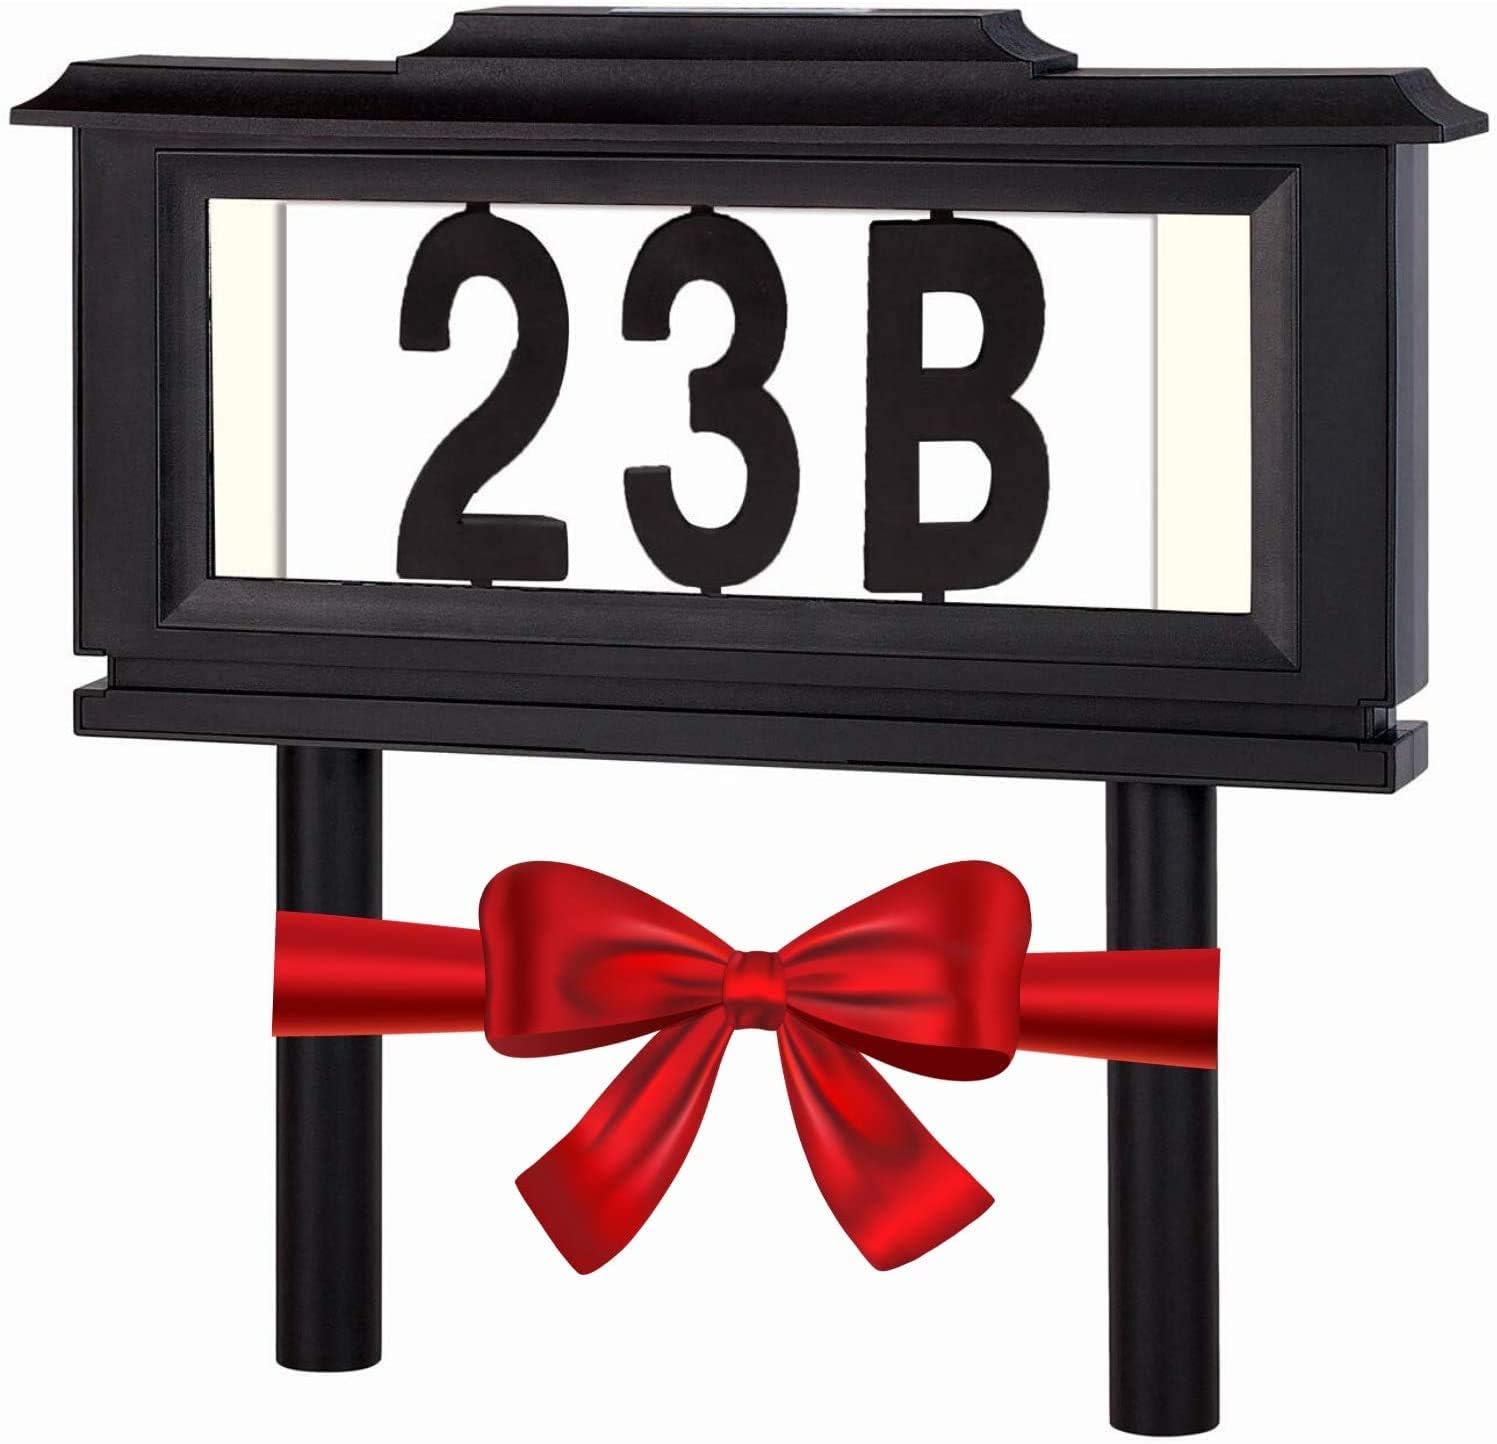 Perfect Life Ideas Lighted House Numbers Address Sign - Solar Lighted Address Numbers Signs for Houses or for Yard - Led Light up House Numbers -